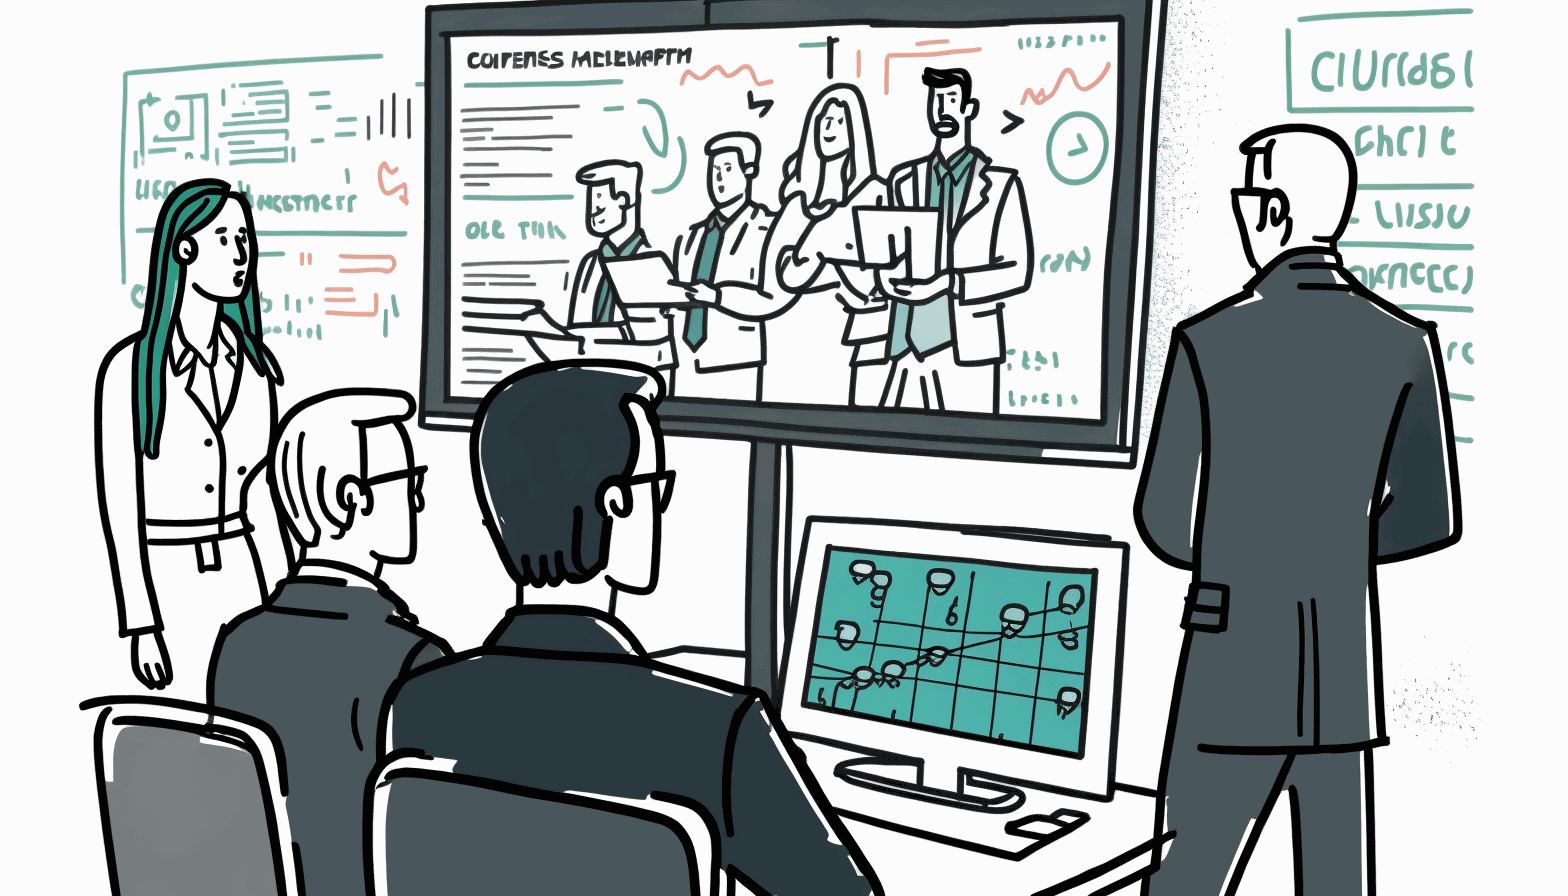 An animated image of a group of employees gathered around a computer or a security expert explaining cybersecurity concepts on a whiteboard.